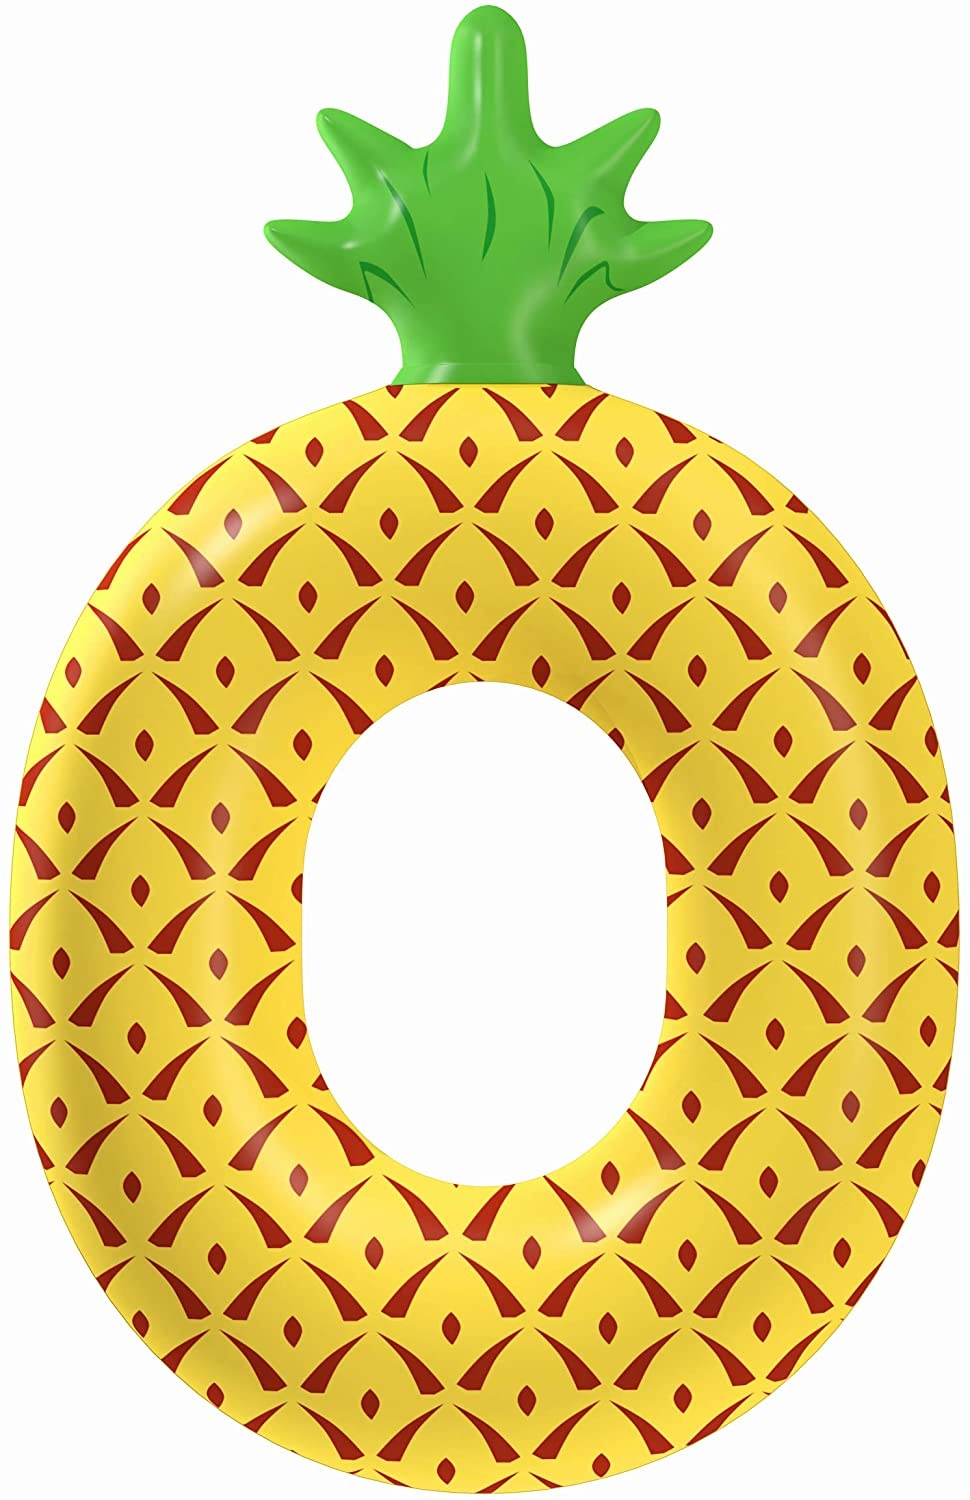 Pineapple pool swimming ring pvc adult children water toy floating row wholesale inflatable fruit tubes-floating pineapple slice